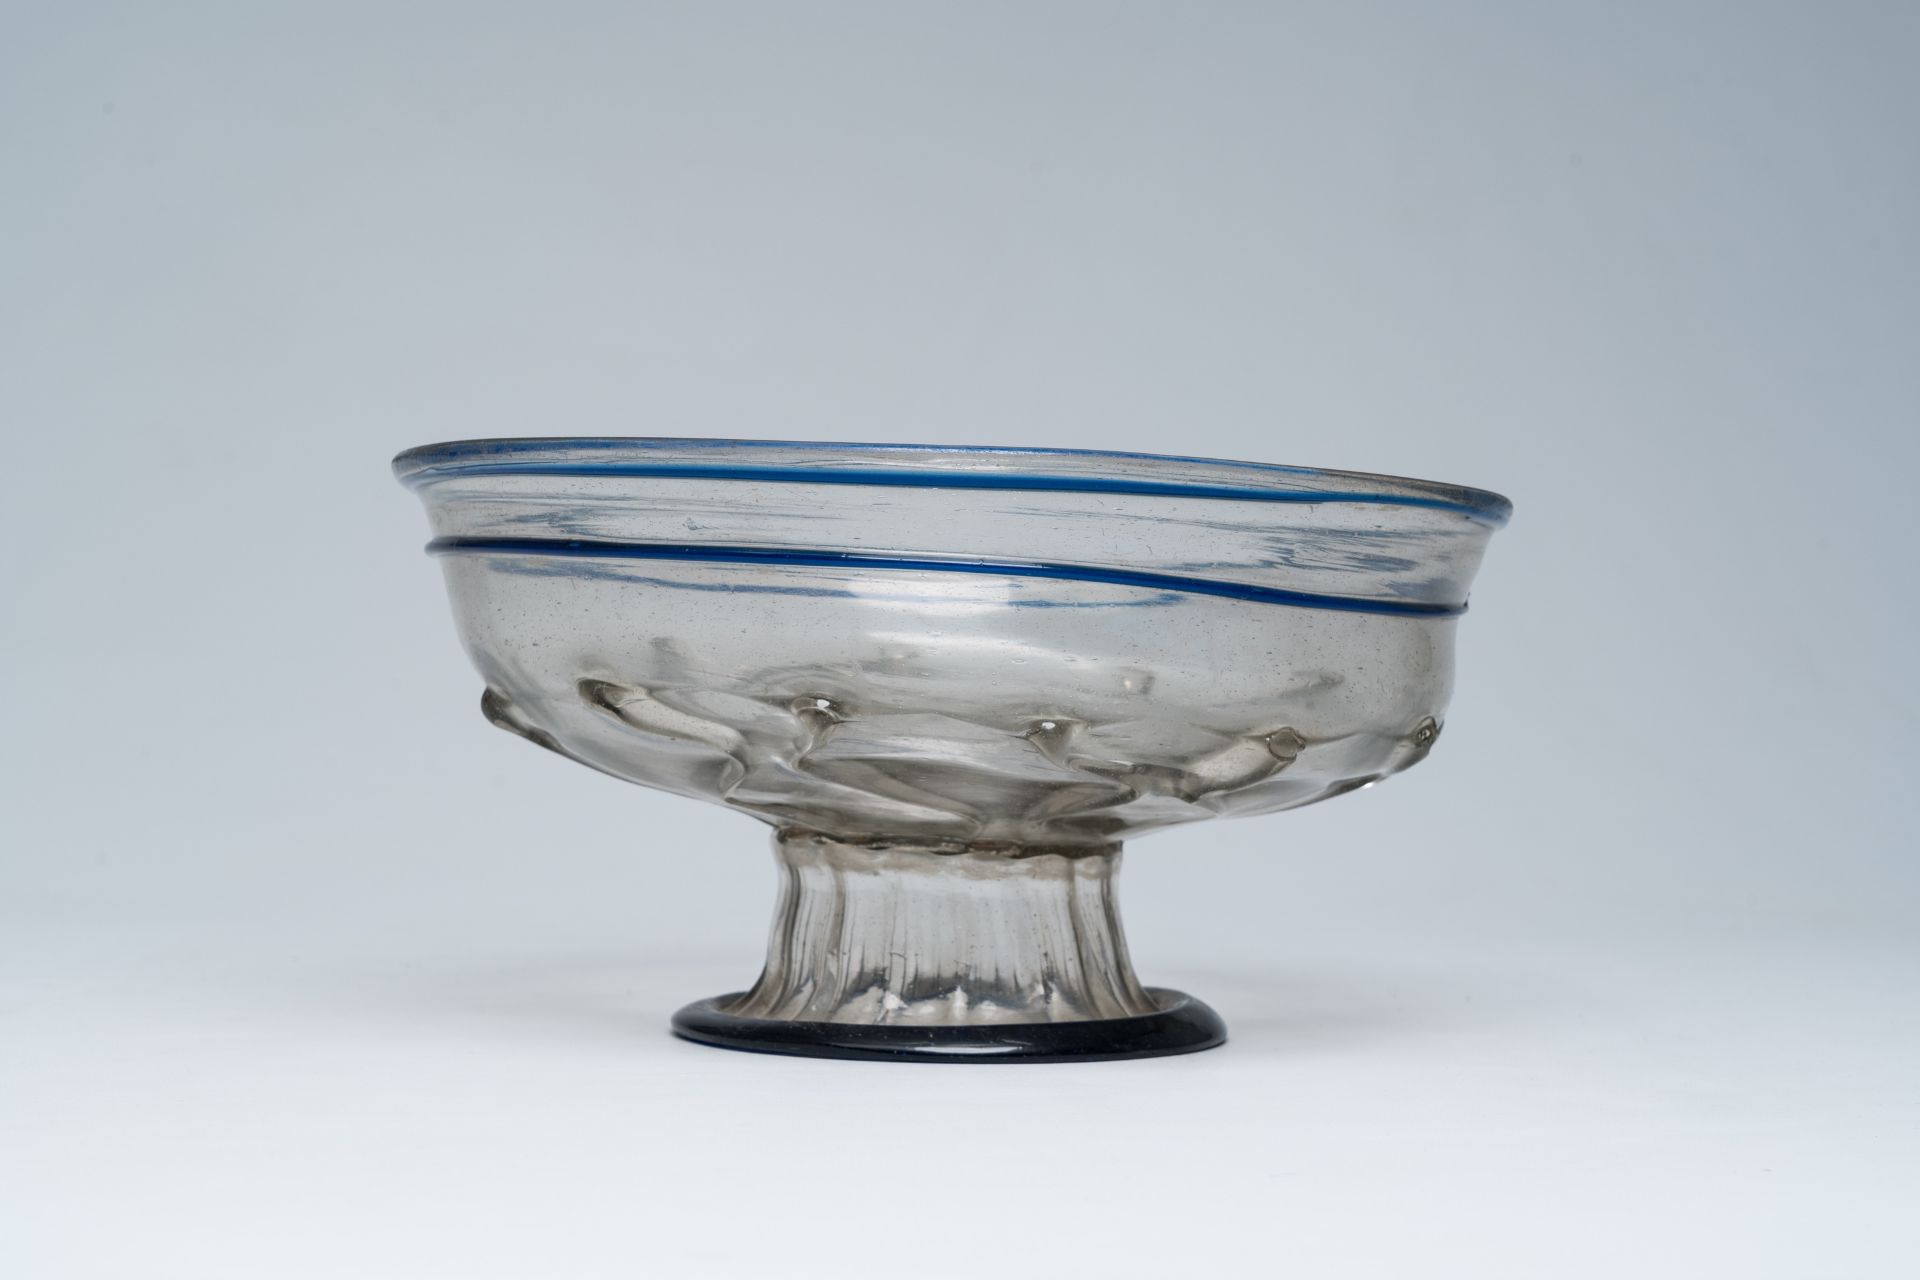 An Italian Renaissance bowl on foot in multicoloured glass, Venice, mid 16th C. - Image 4 of 7